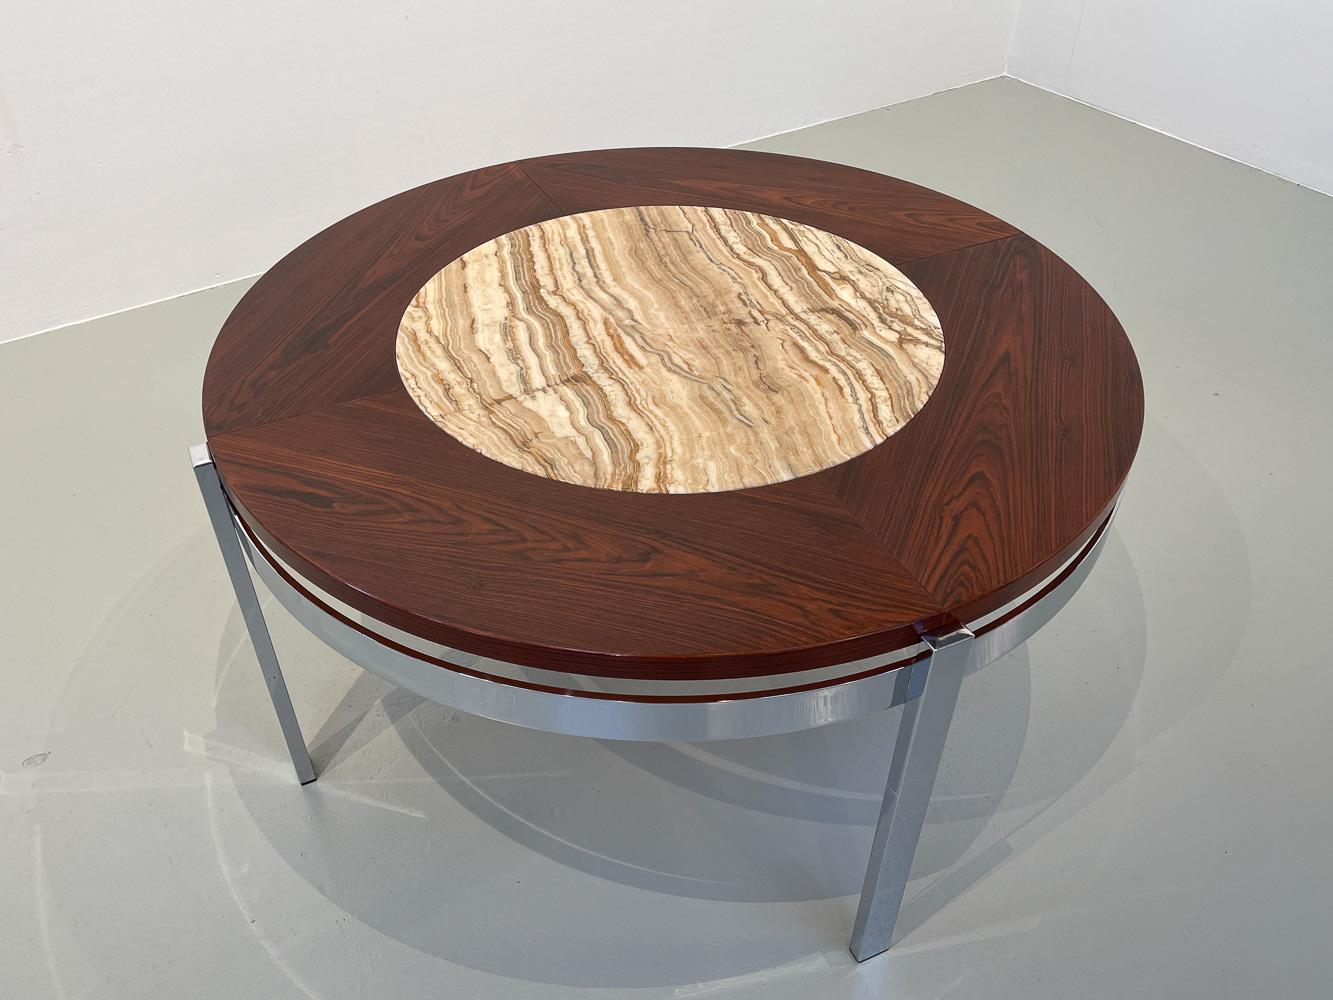 Danish Modern Round Rosewood and Marble Coffee Table by Bendixen Design, 1970s.
Stunning circular coffee table designed and manufactured by Bendixen Design Denmark.
Circular frame in chromed steel with four square legs. Floating table top in